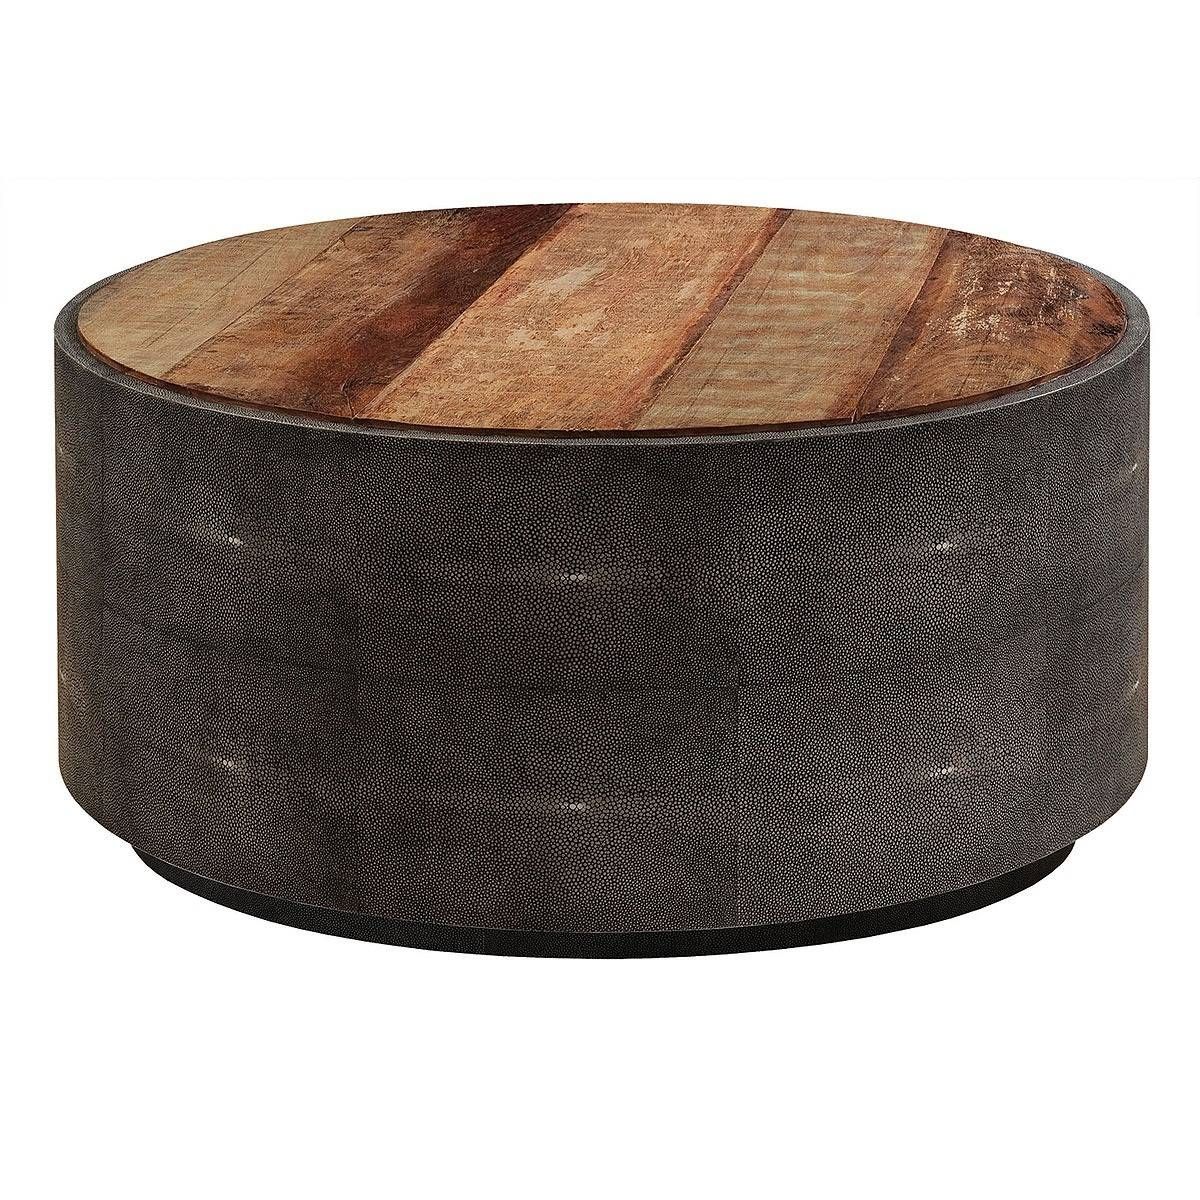 Astonishing Wooden Round Coffee Table Ideas End Tables For Intended For Small Round Coffee Tables (View 23 of 30)